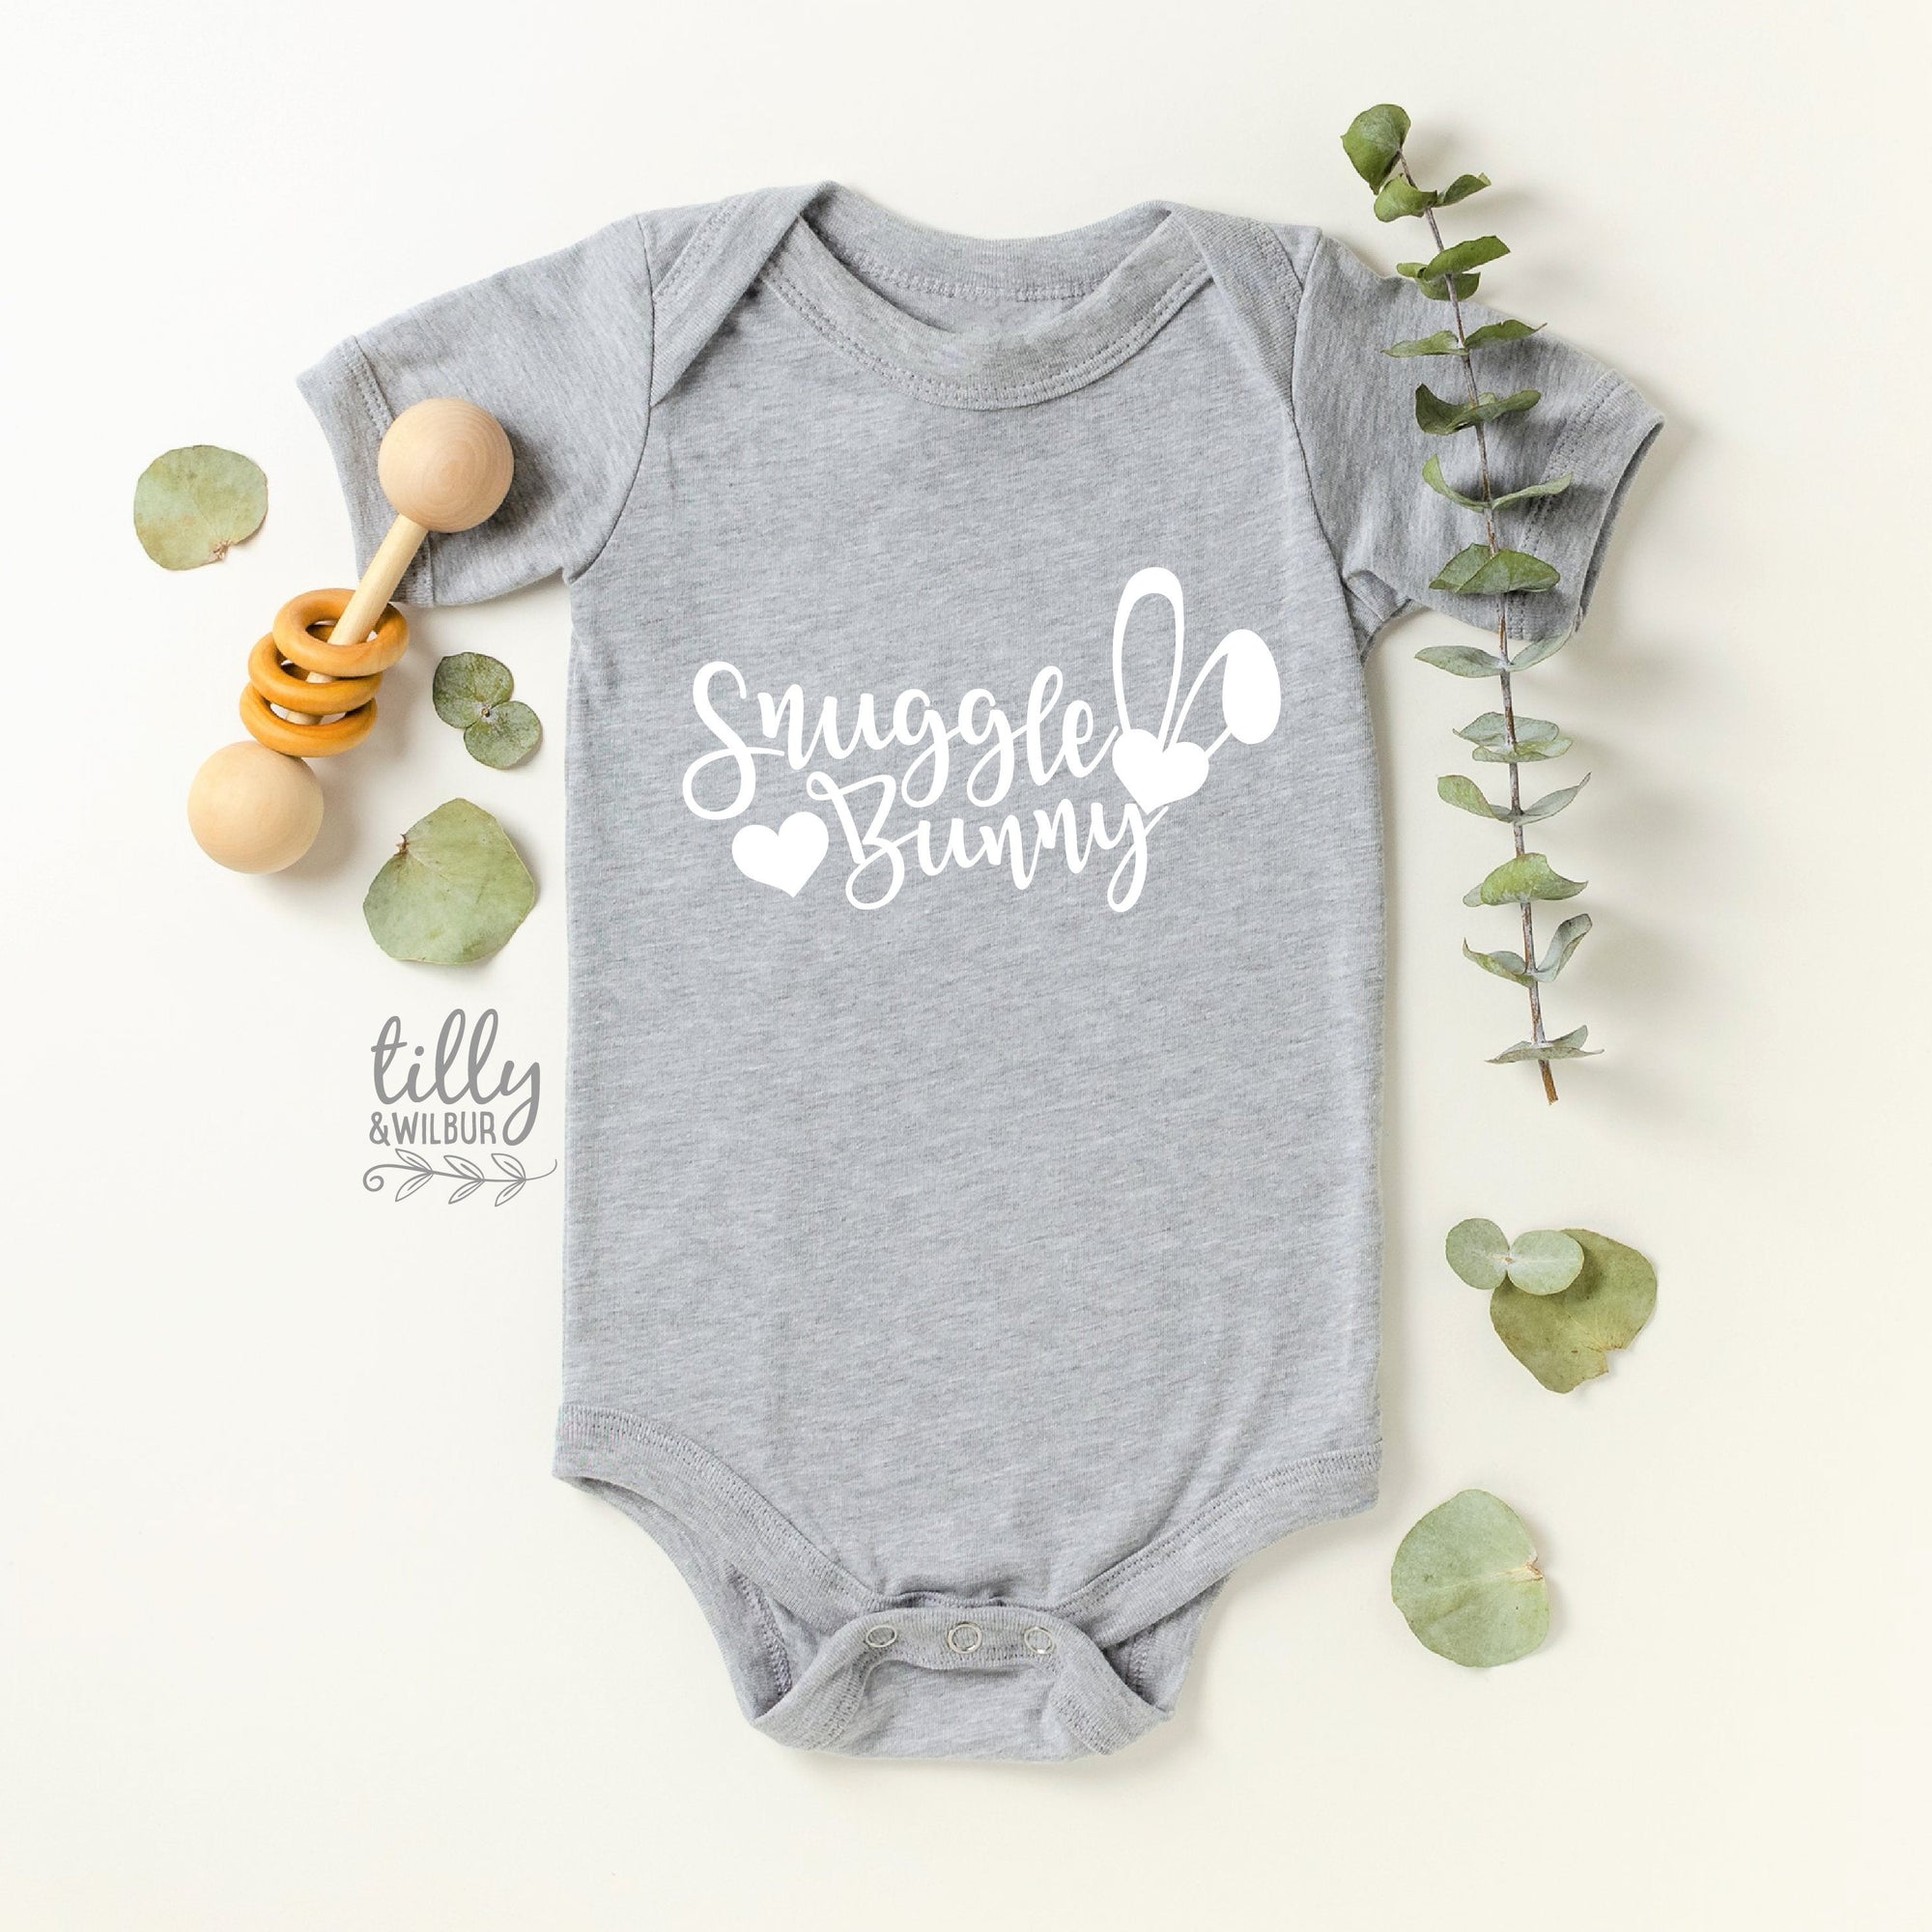 Snuggle Bunny Easter Baby Bodysuit, Bunny Ears Bodysuit, First Easter Baby Bodysuit, Newborn Easter Gift, 1st Easter Outfit, Baby Easter